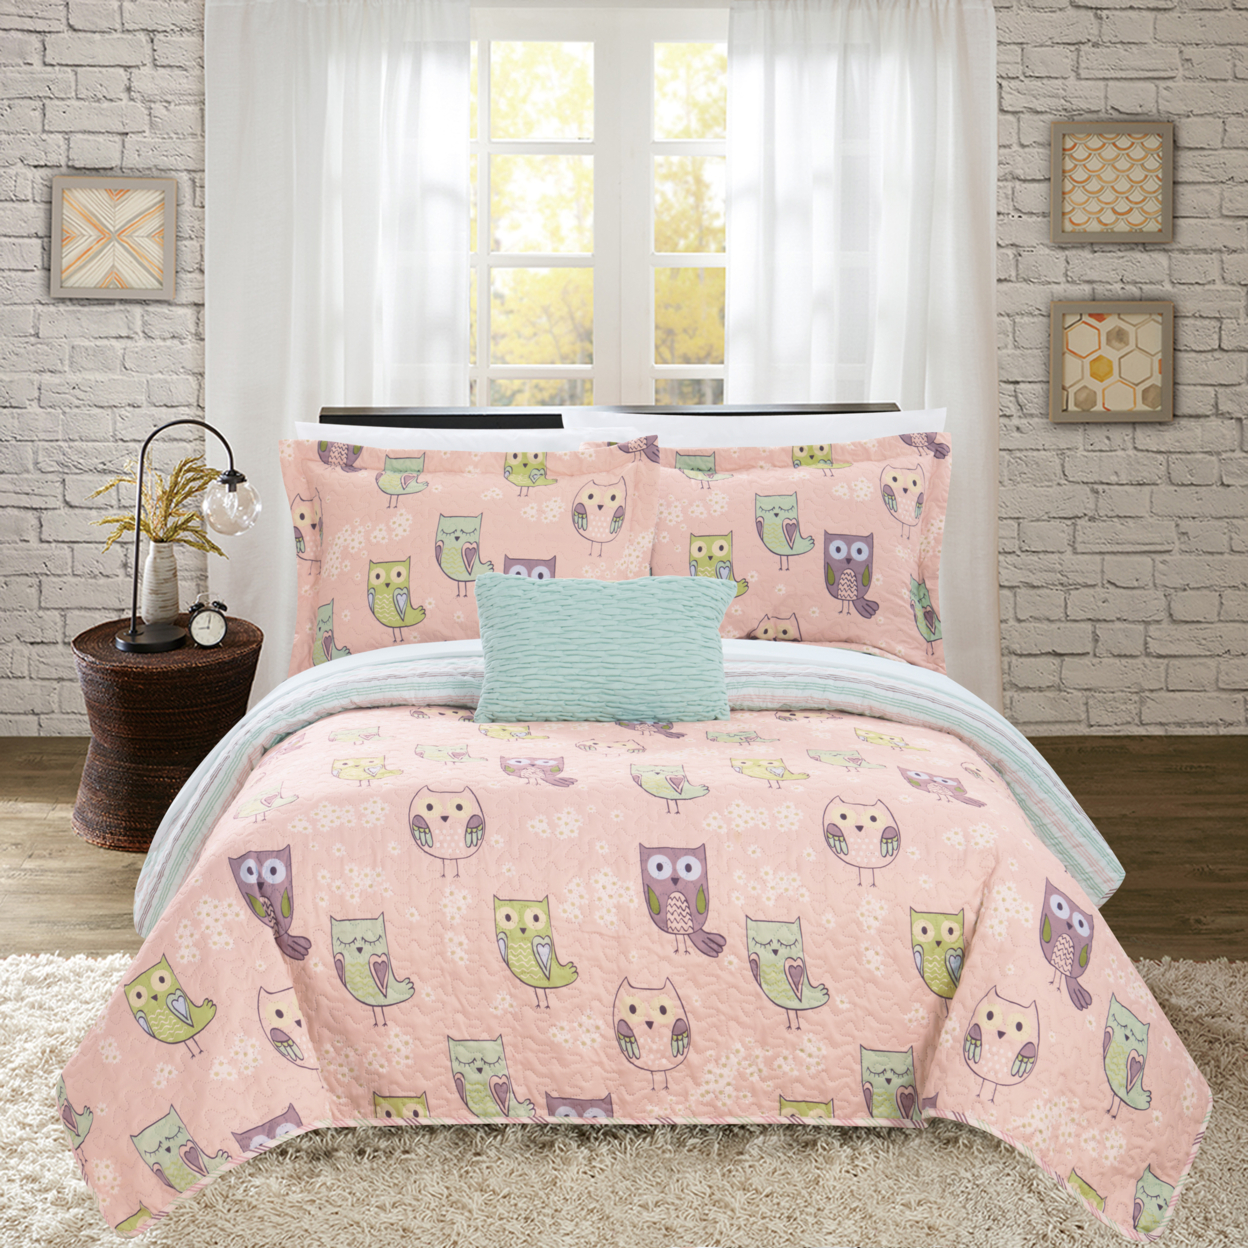 Owl Farm 4 Piece Reversible Quilt Set Cute It's A Hoot Owl Friends Youth Design Bed In A Bag - Pink, Full